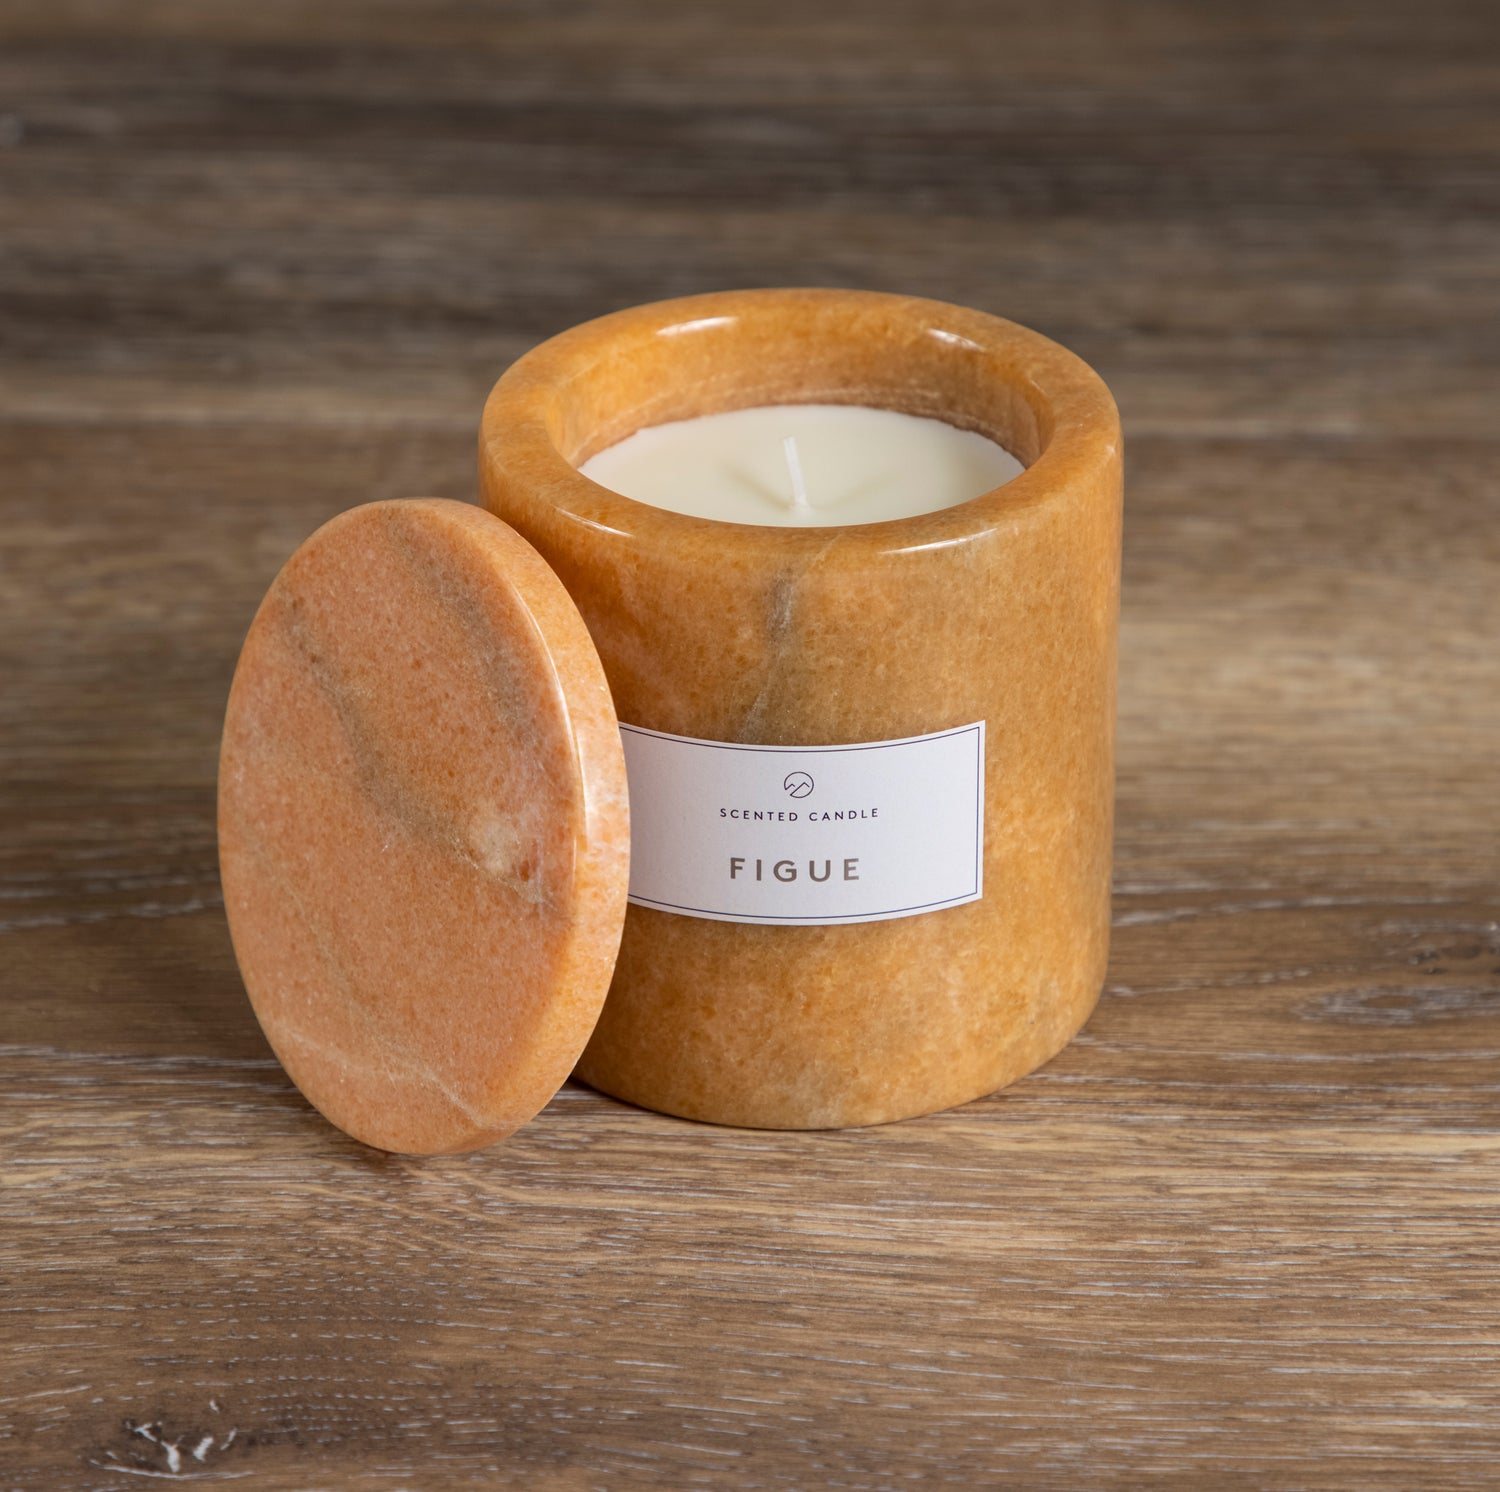 Pesa Marble Candle, Figue